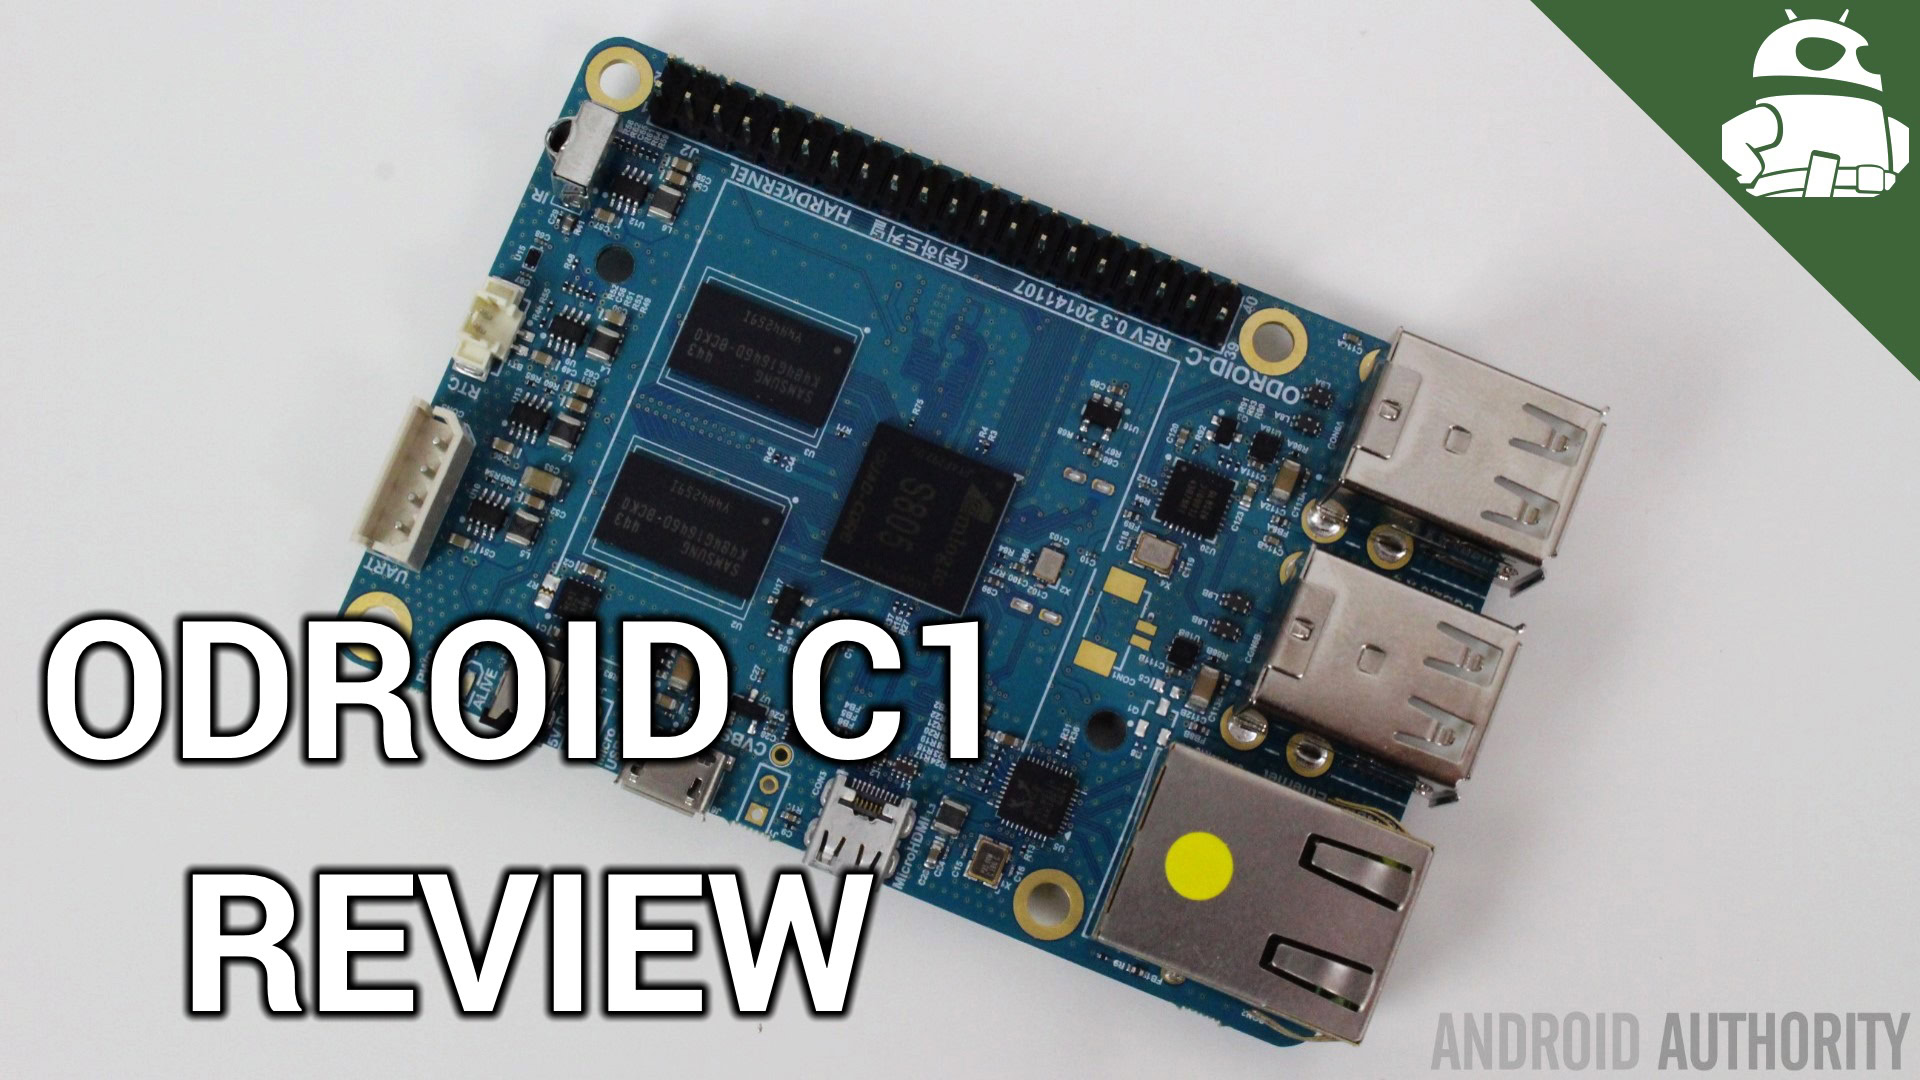 ODROID C1 review - Android Authority